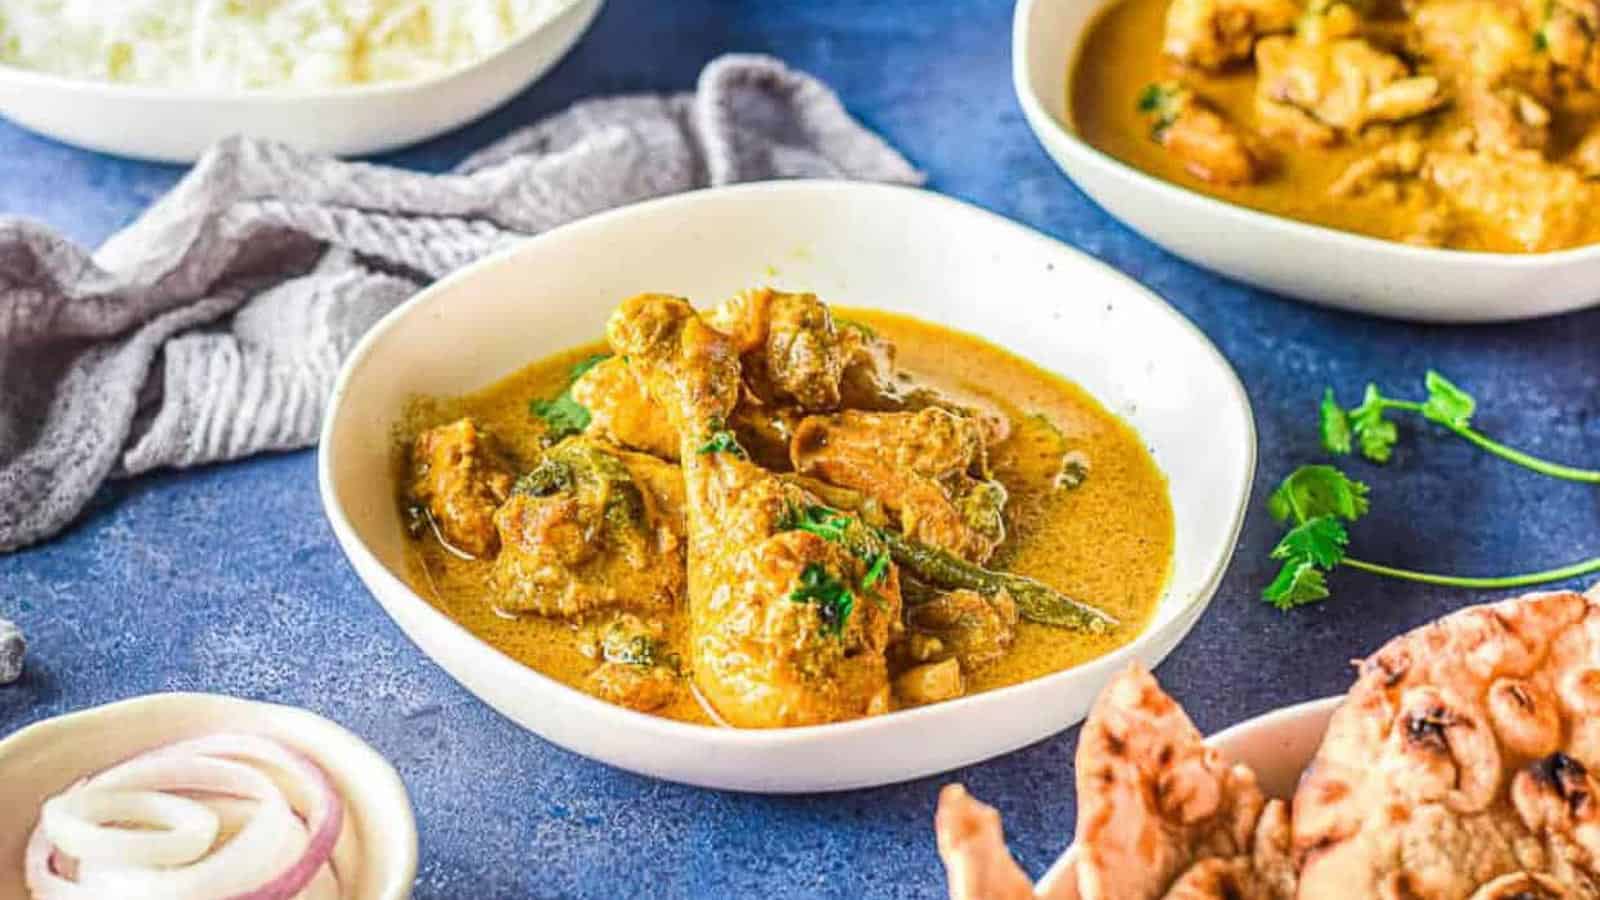 <p>So, you got an Instant Pot, right? Brilliant. Now imagine it being put to absolute good use with Chicken Korma. It’s got tender chicken, Indian spices, and coconut milk – all this makes for a crazy comforting and flavorful meal. Trust me, it’s a day-changer.<br><strong>Get the Recipe: </strong><a href="https://allwaysdelicious.com/instant-pot-chicken-korma/?utm_source=msn&utm_medium=page&utm_campaign=msn">Instant Pot Chicken Korma</a></p>